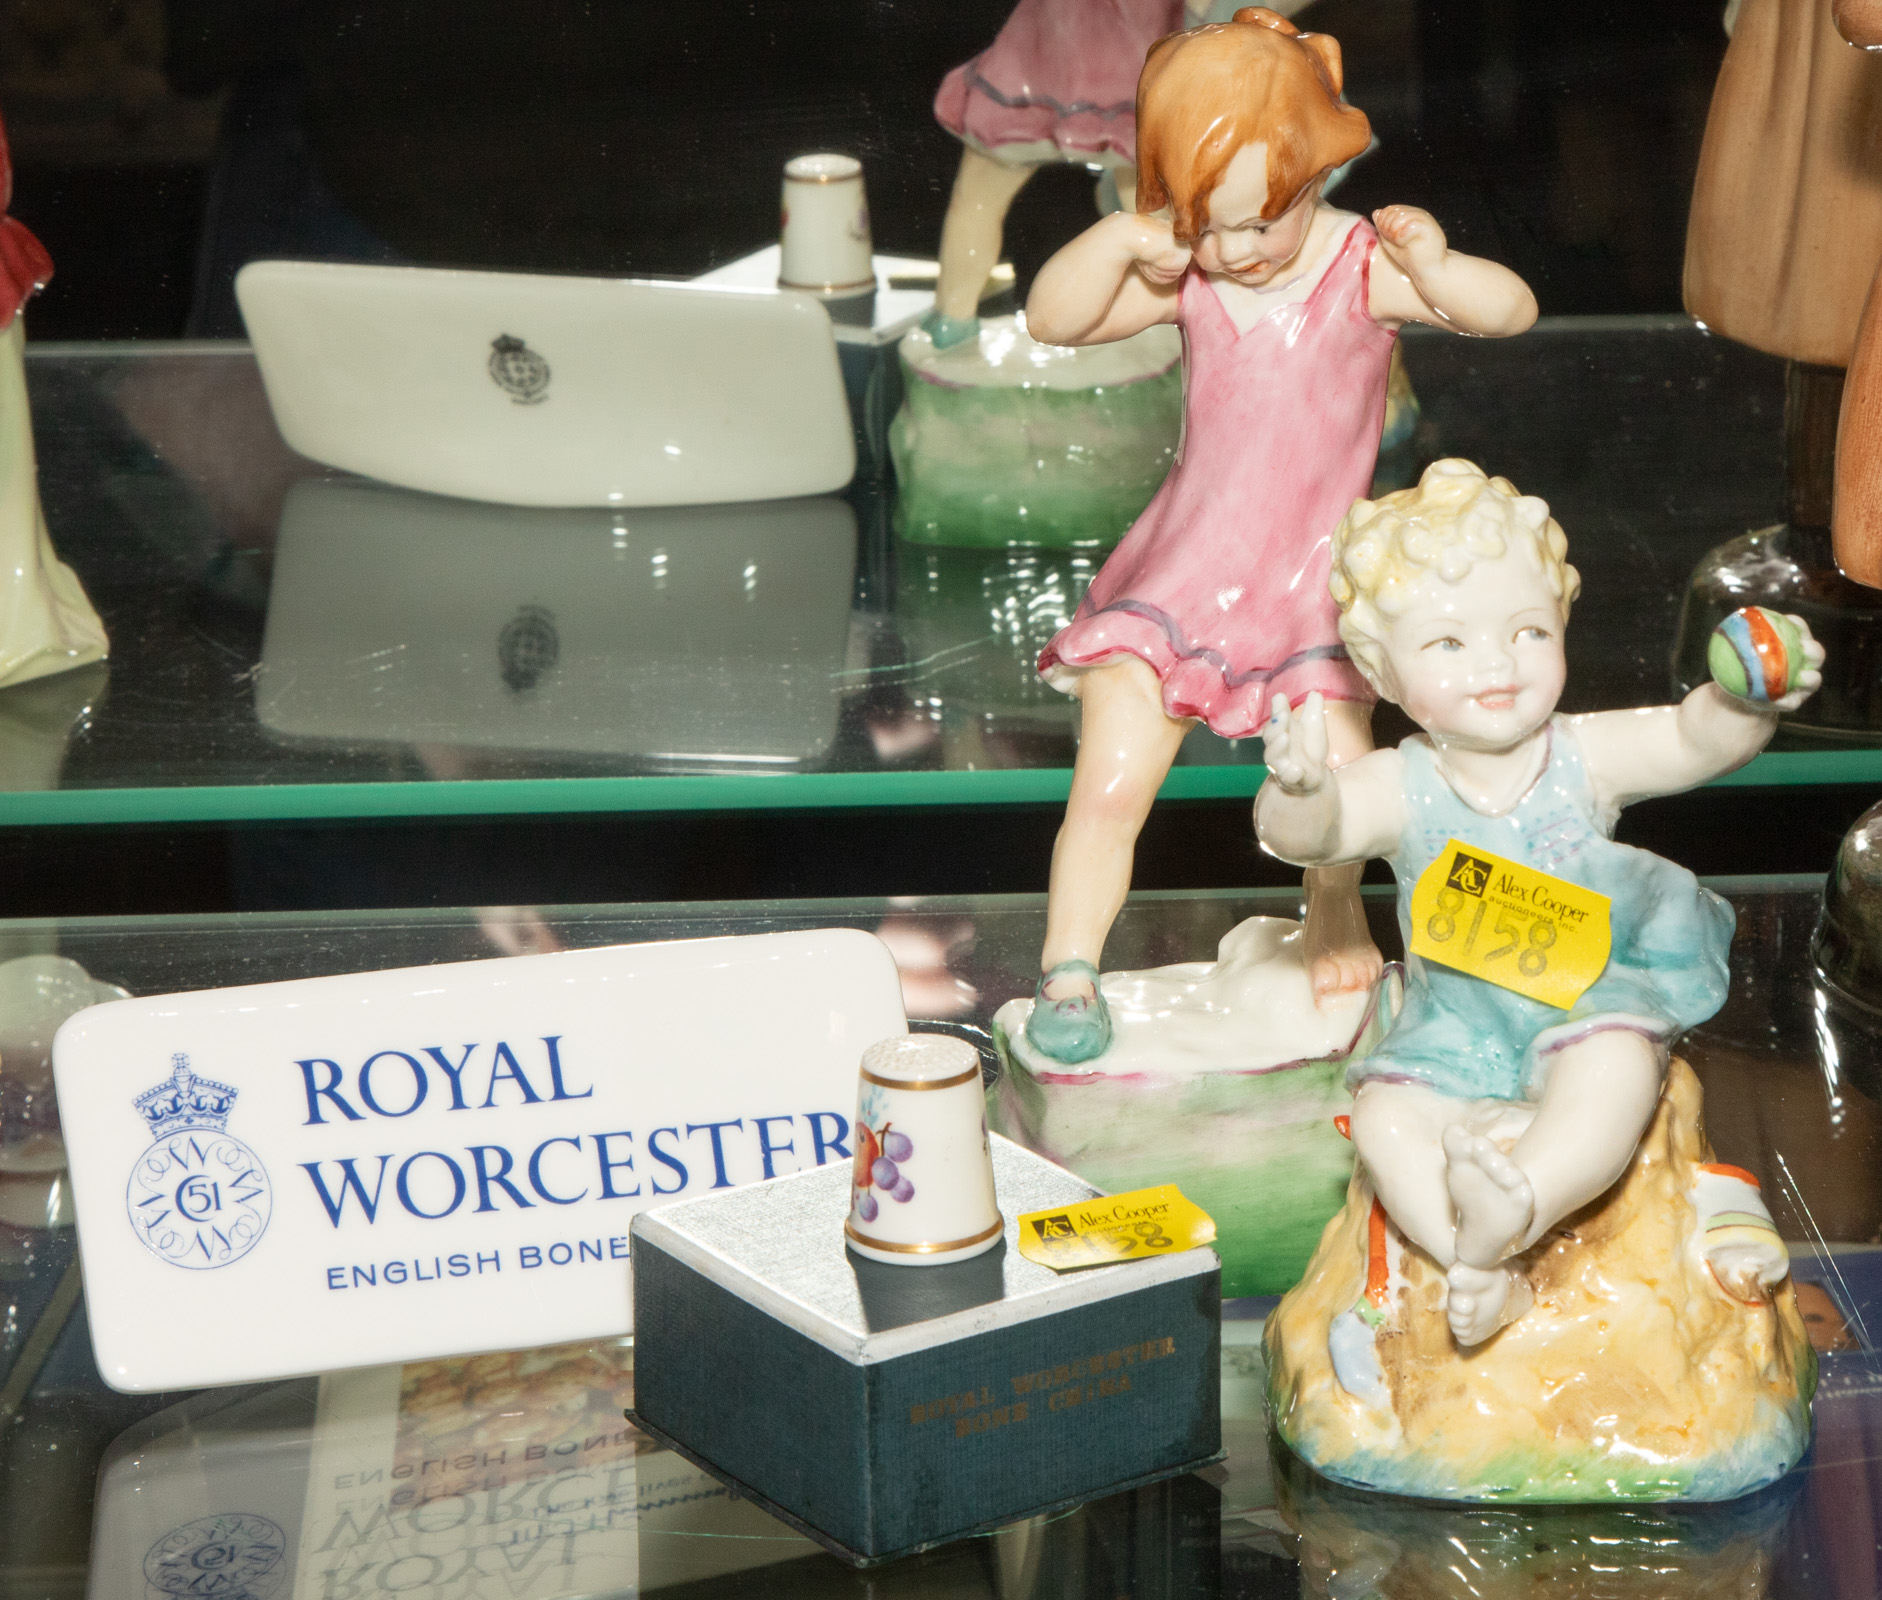 TWO ROYAL WORCESTER FIGURINES With a